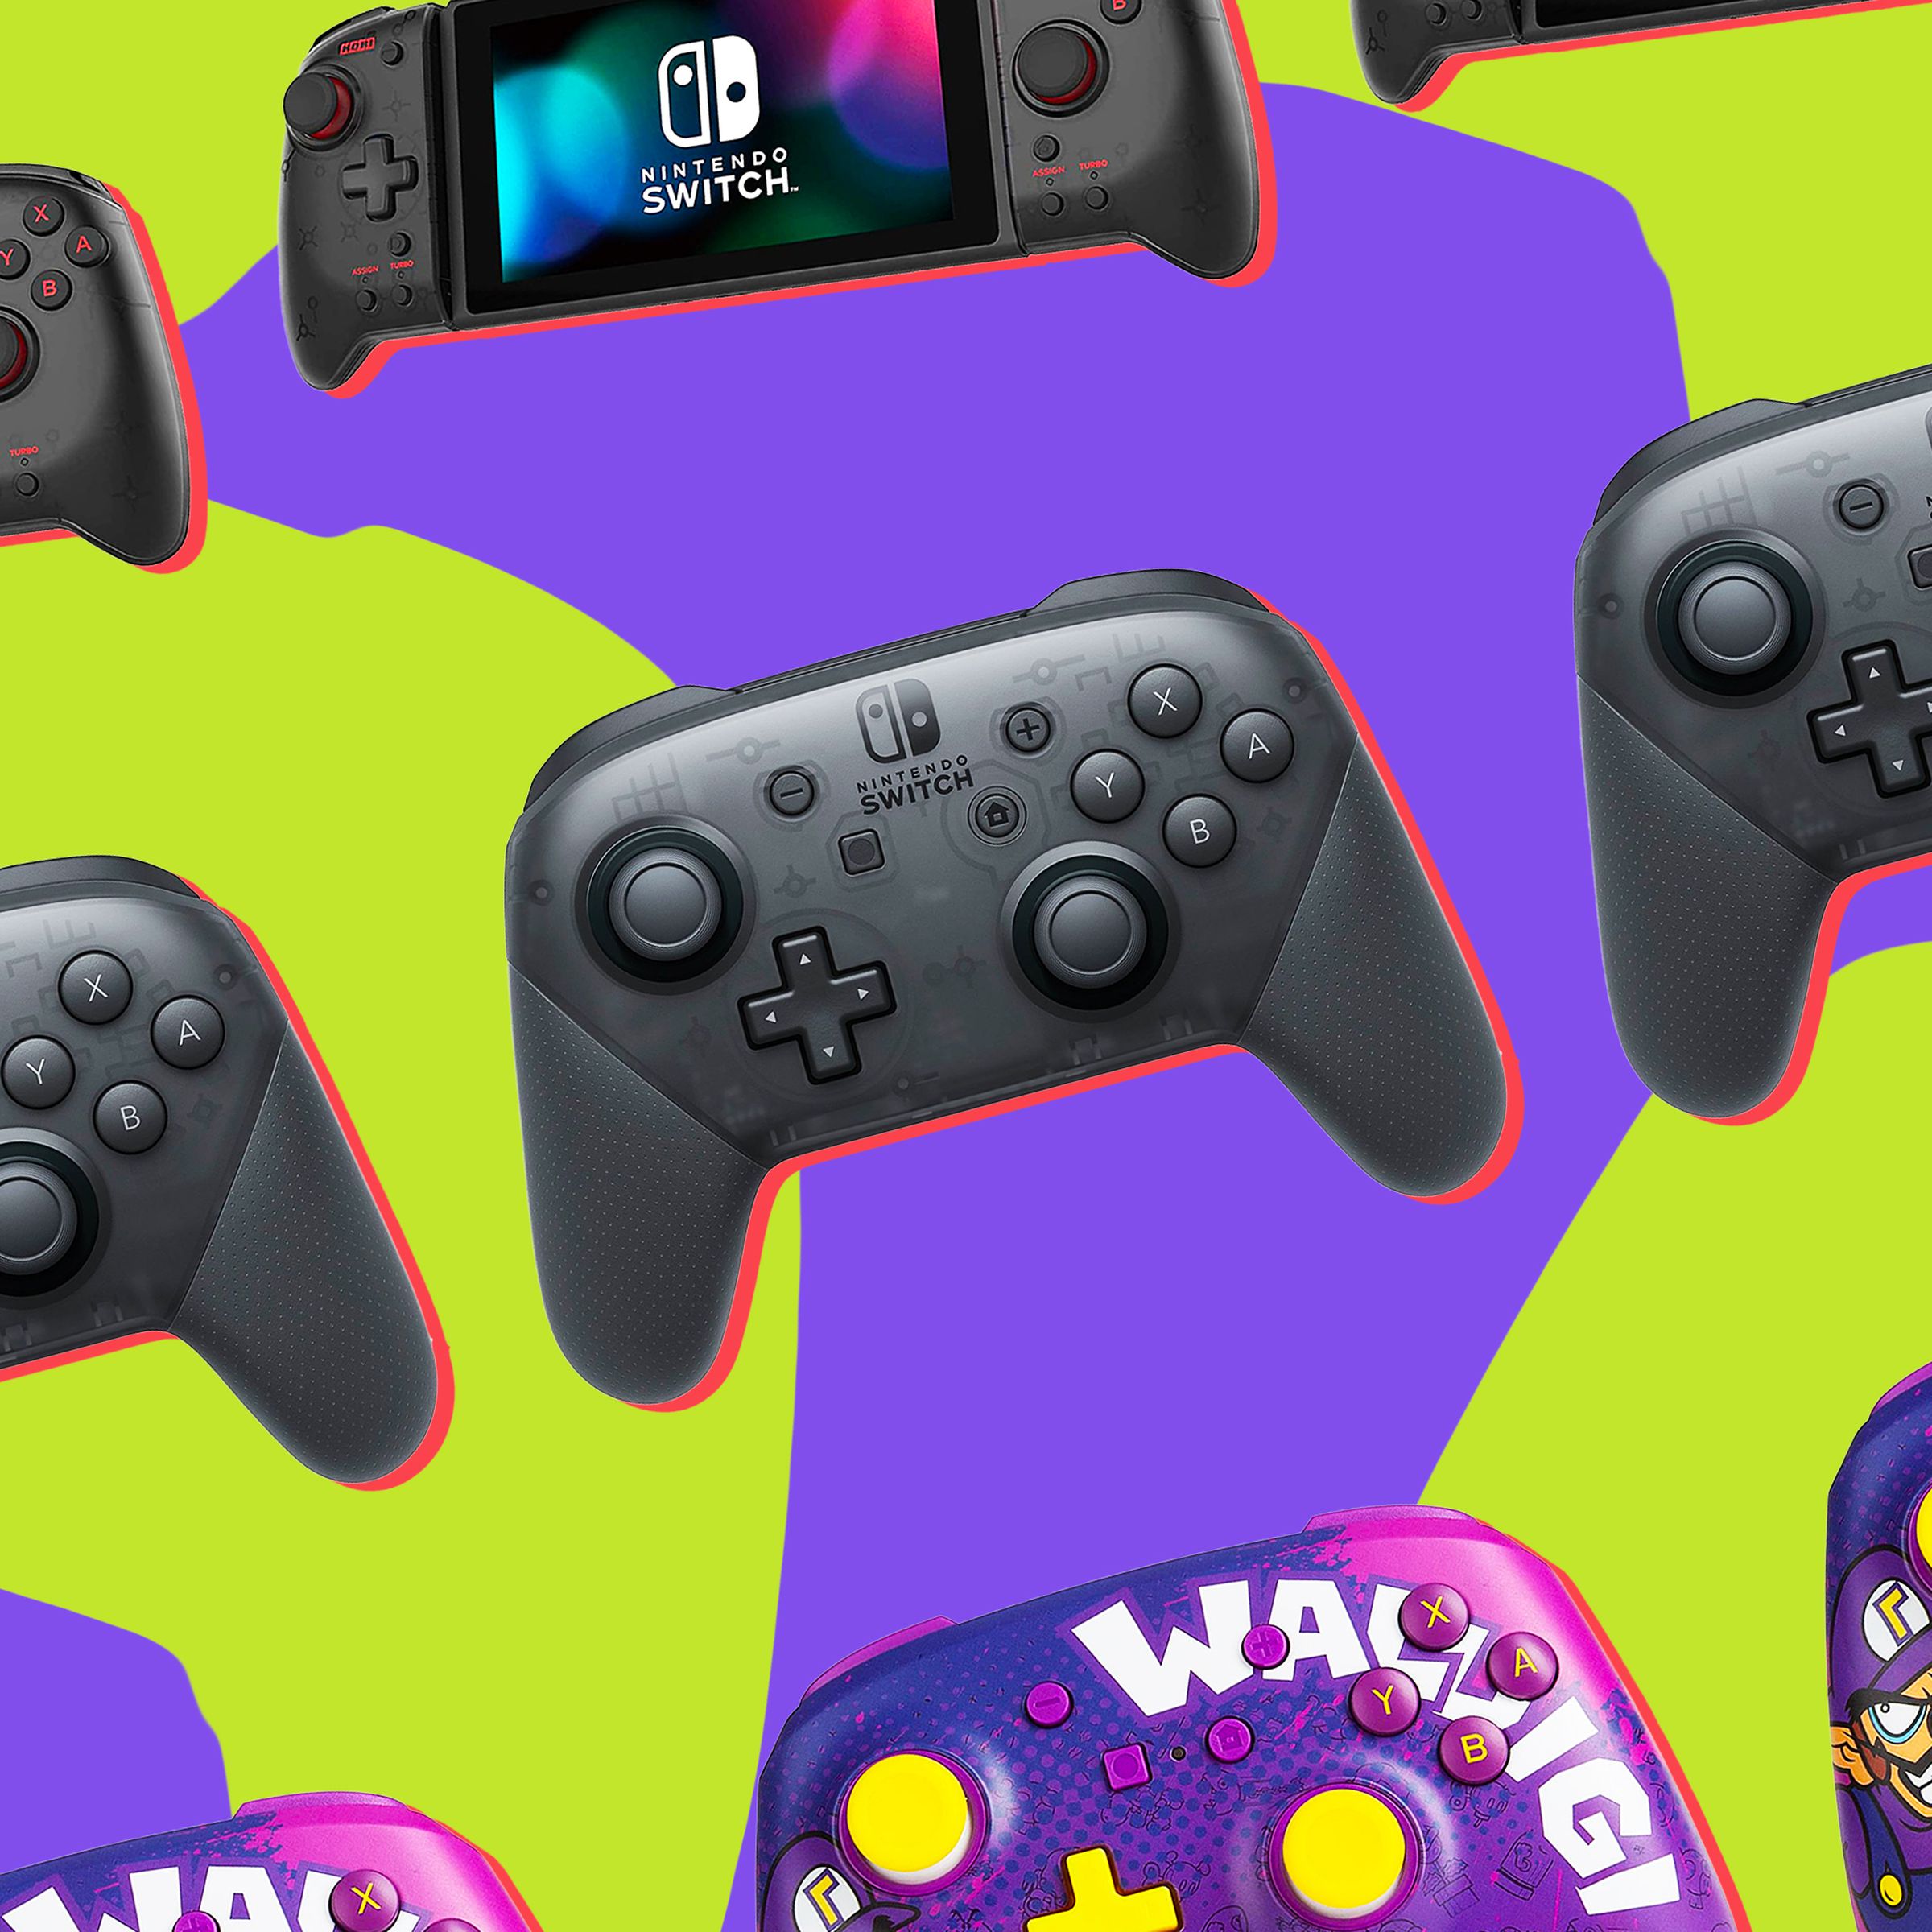 An illustration of a Nintendo Switch and various controllers against a purple and lime-green background.